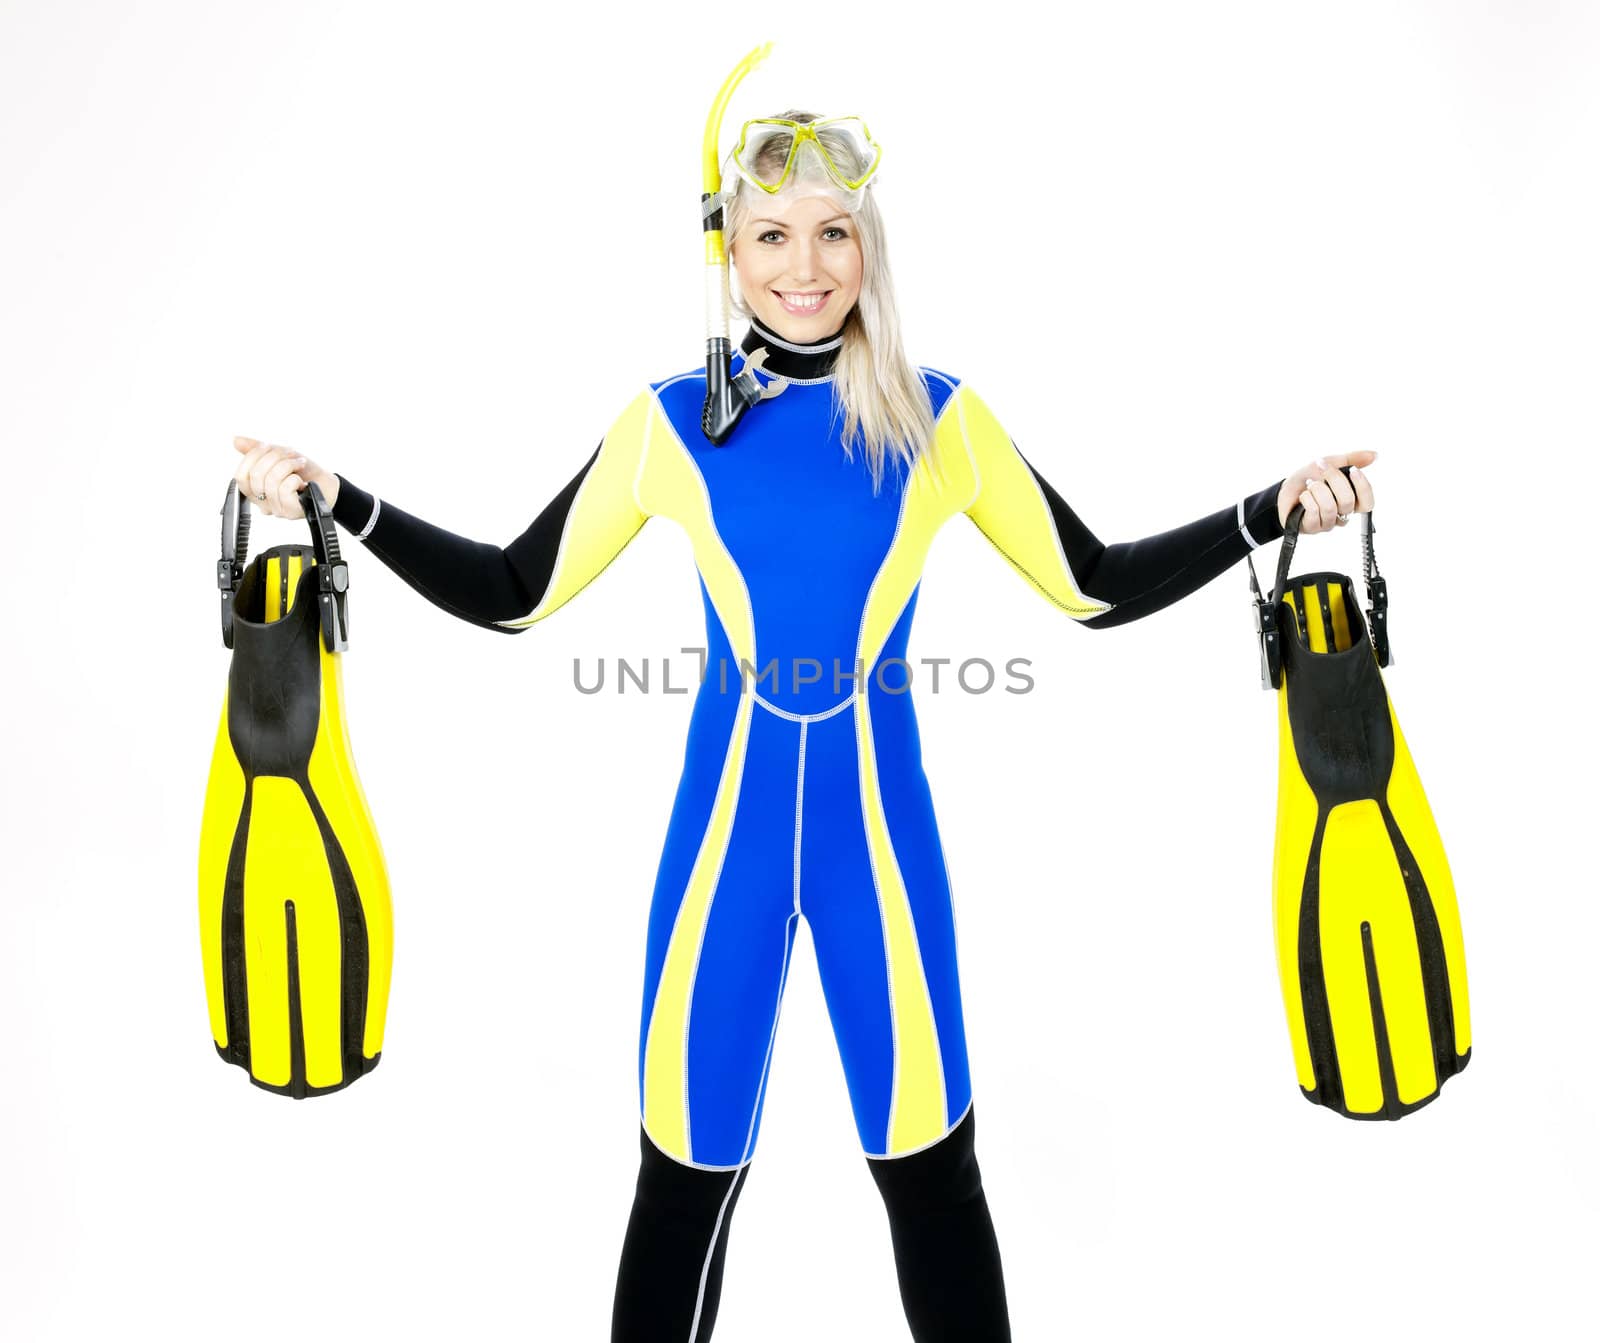 standing young woman wearing neoprene with snorkeling equipment